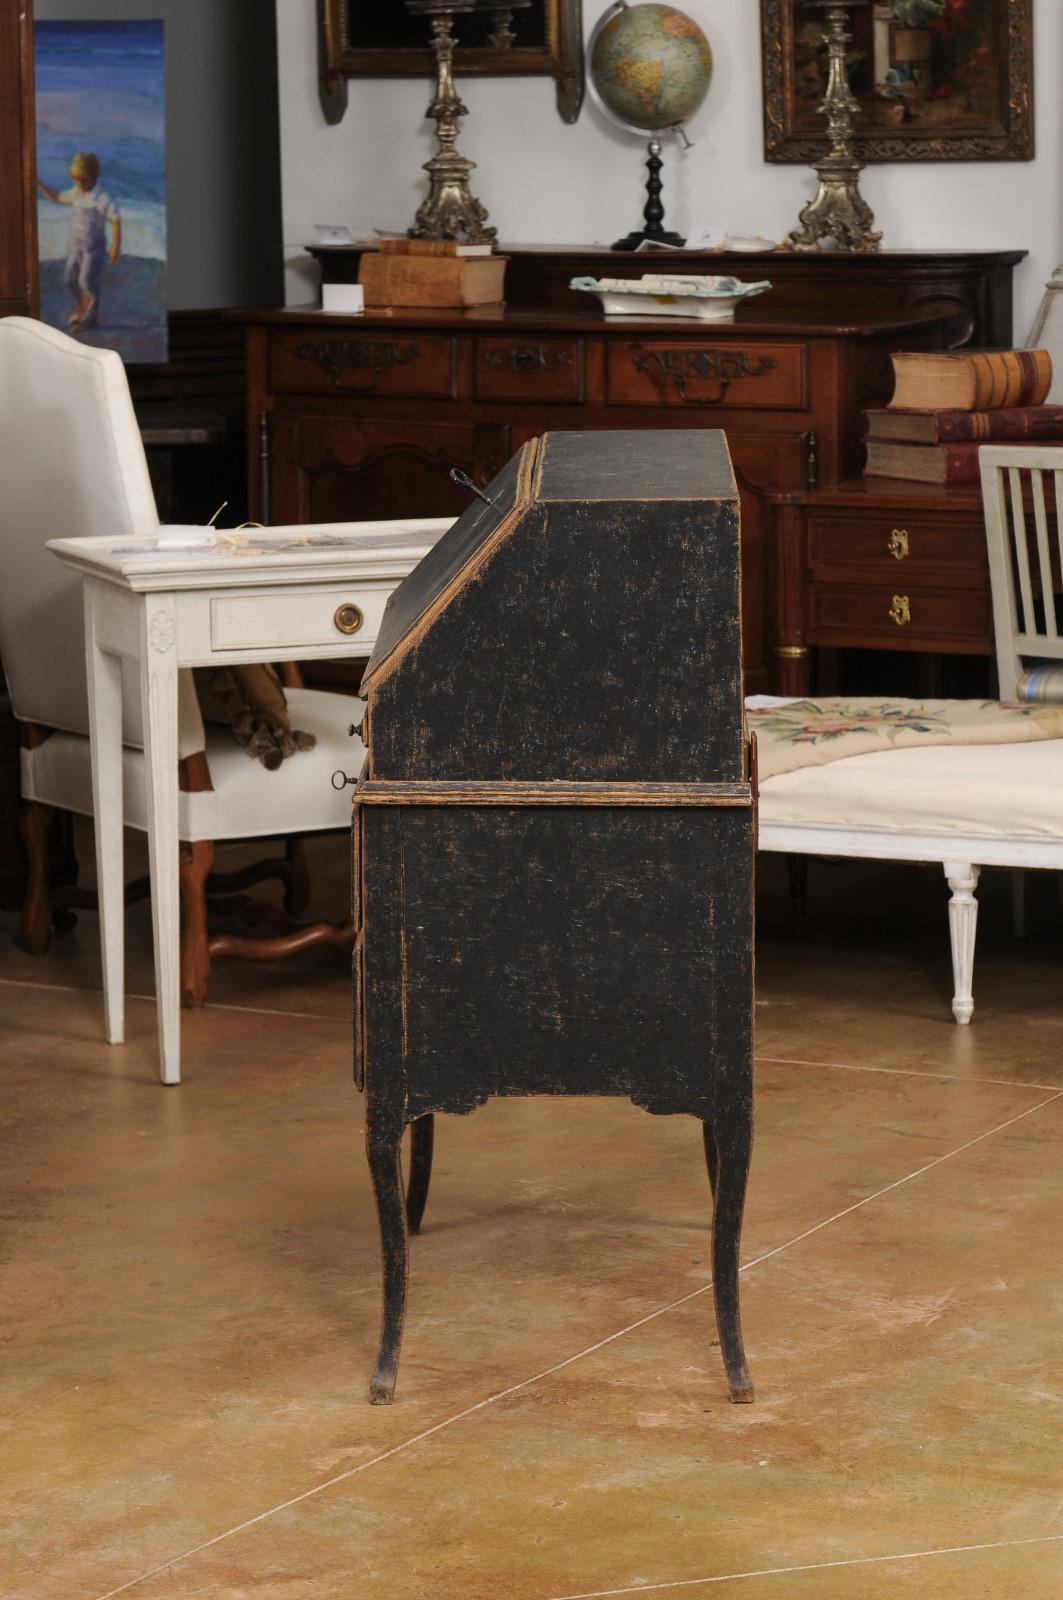 Swedish Rococo Period Slant Front Desk Painted in Black with Distressed Finish 4